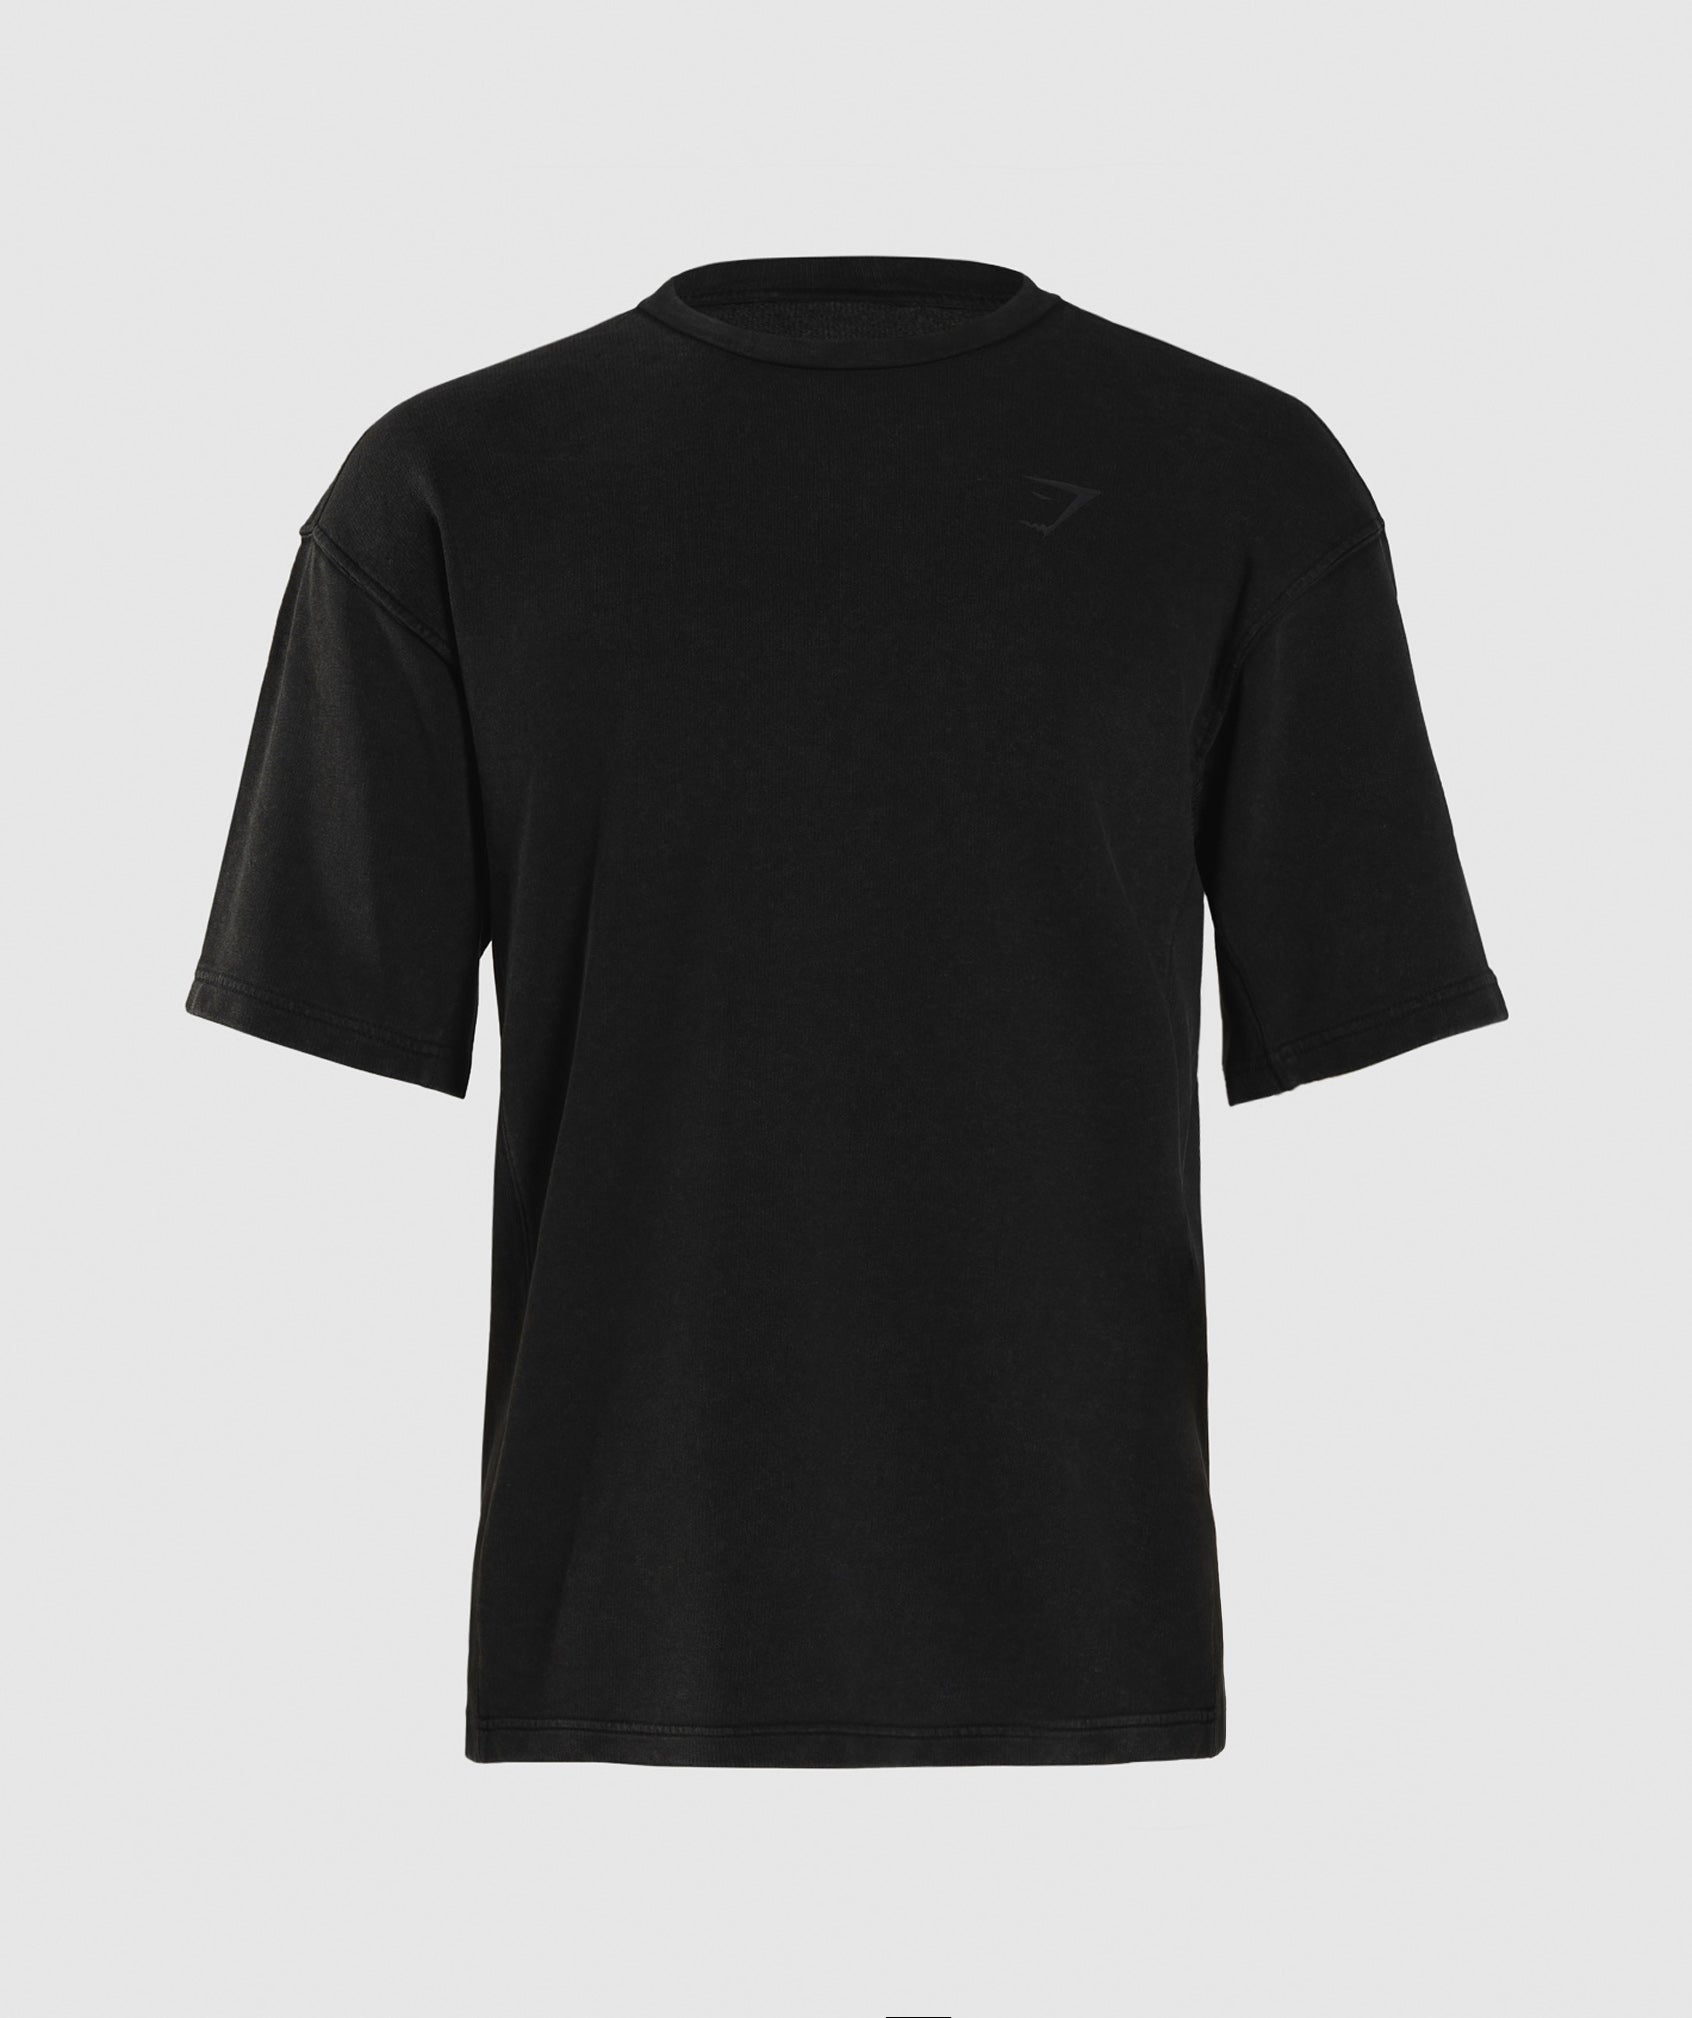 Power Washed Short Sleeve Crew in Black